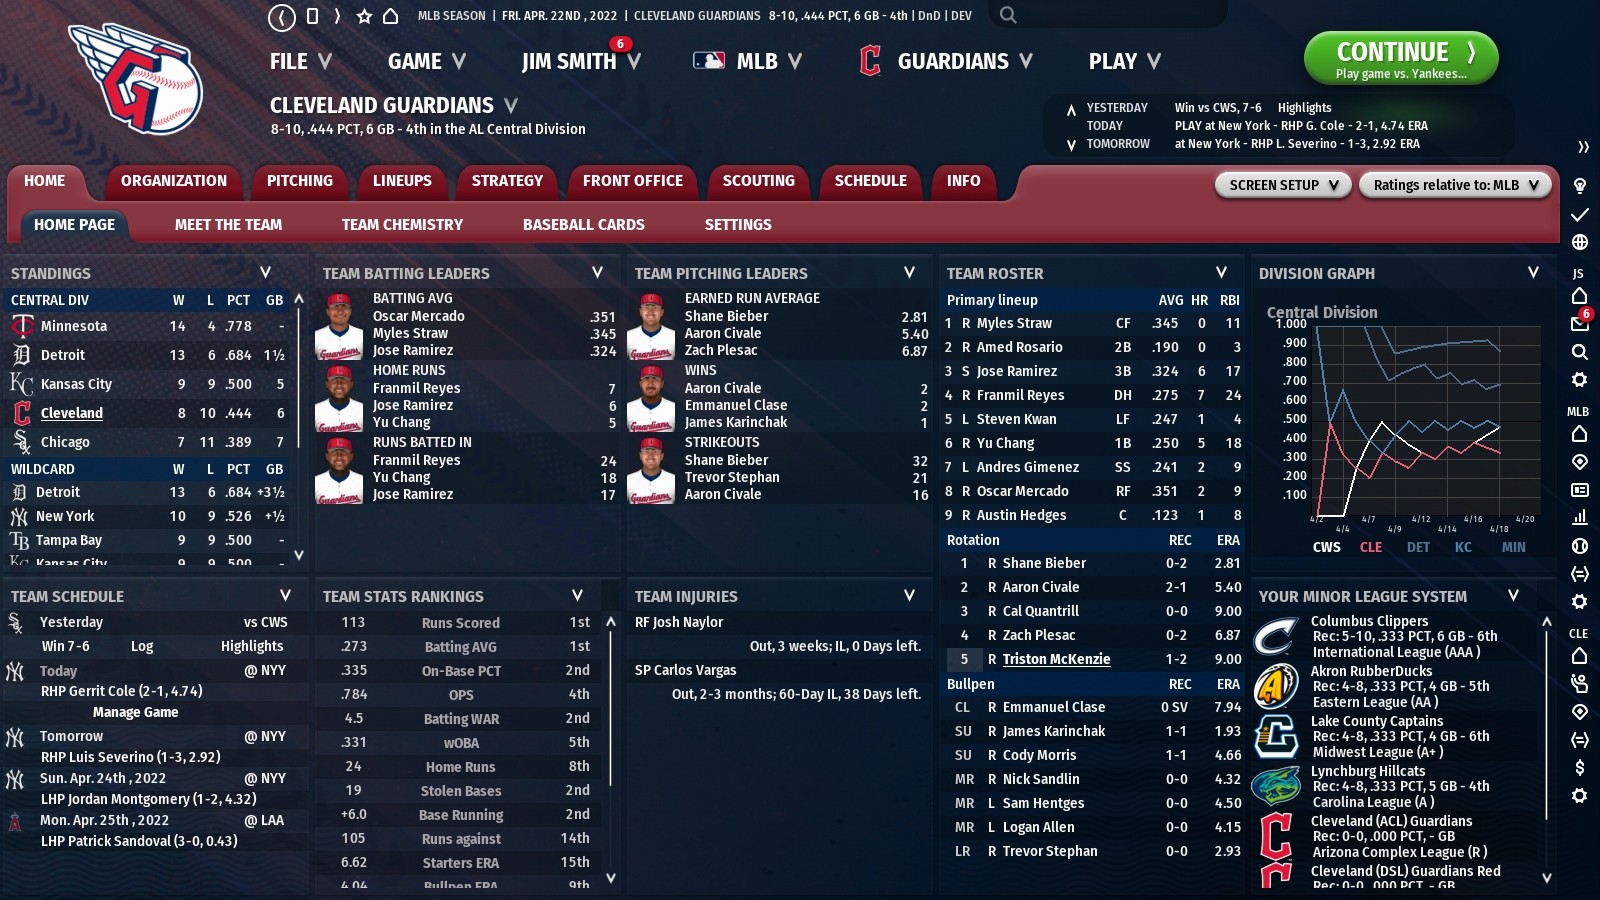 New Logos and Uniforms for 2022 - Page 4 - OOTP Developments Forums